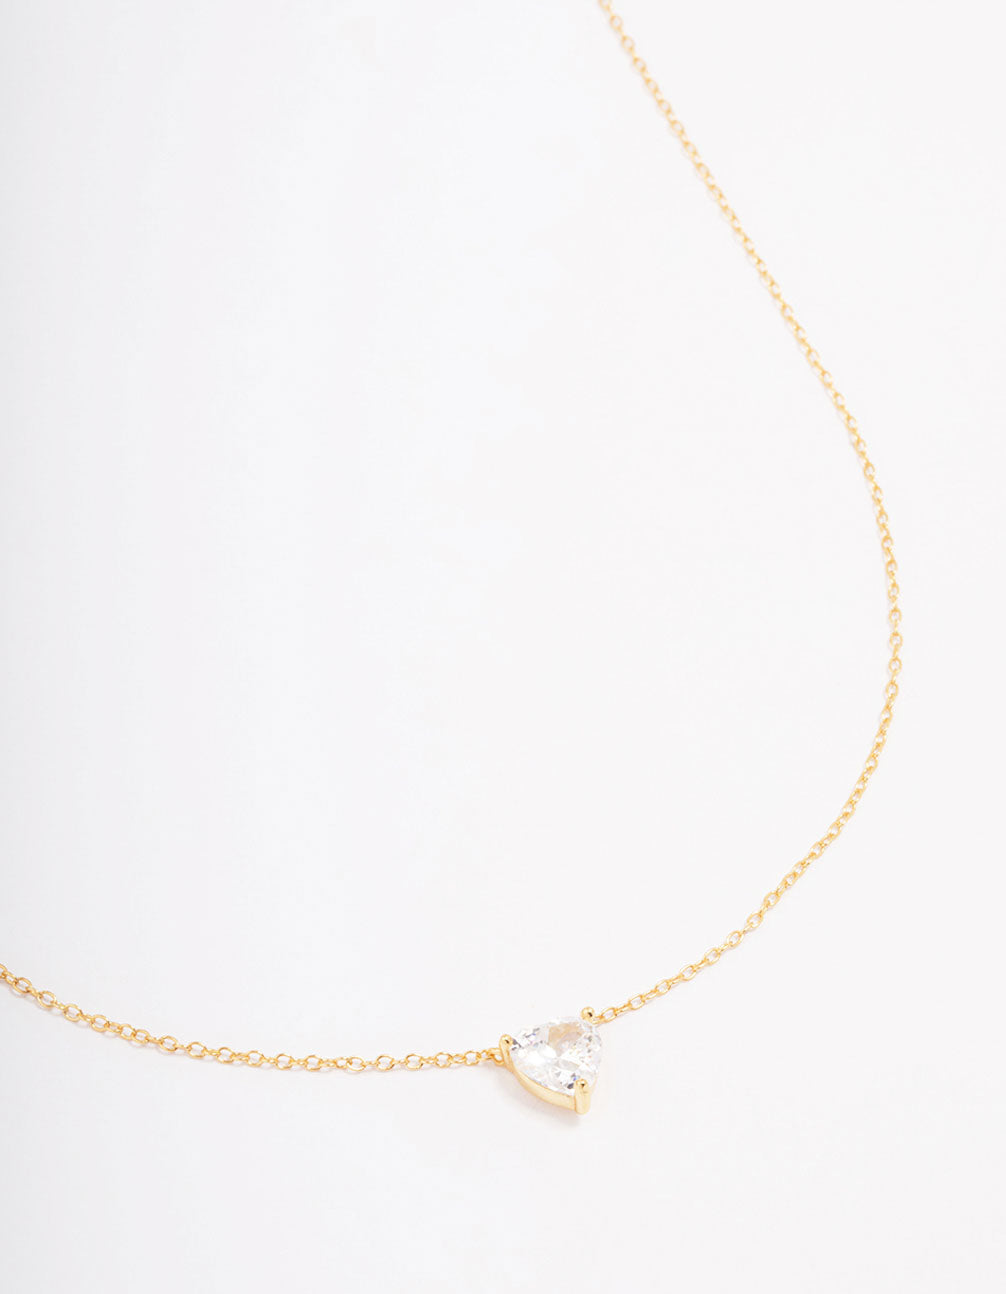 10k Solid Yellow Gold Figaro Link Necklace/bracelet/anklet Chain, Everyday  Chain,real Gold Chain, 730 Gift/best Selling, Sale - Etsy | Real gold  chains, Diamond initial necklace, Gold chains